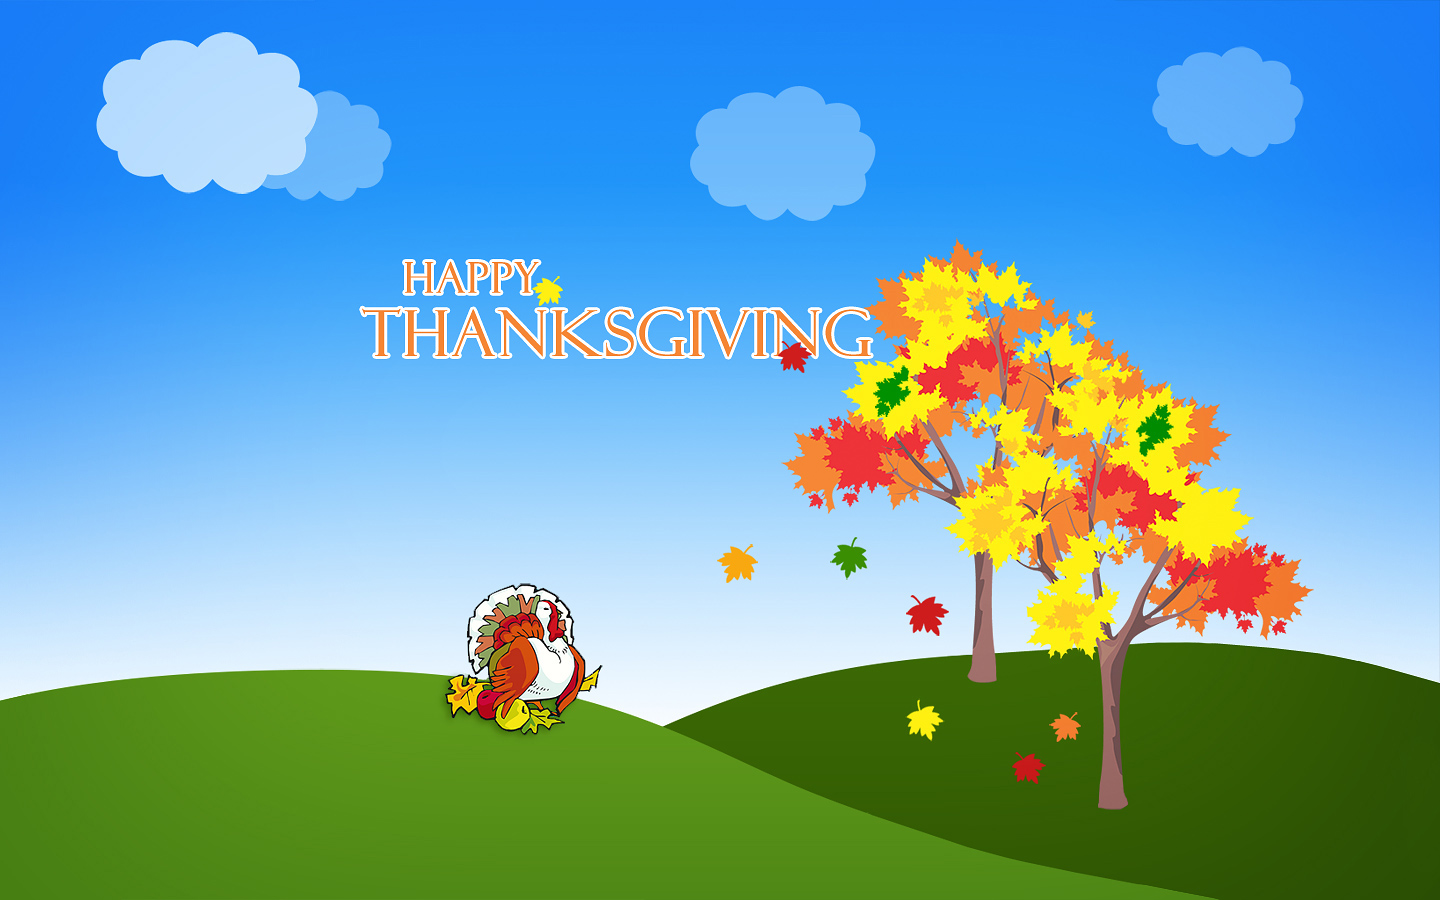 The Happy Turkey Day Thanksgiving Wallpaper For